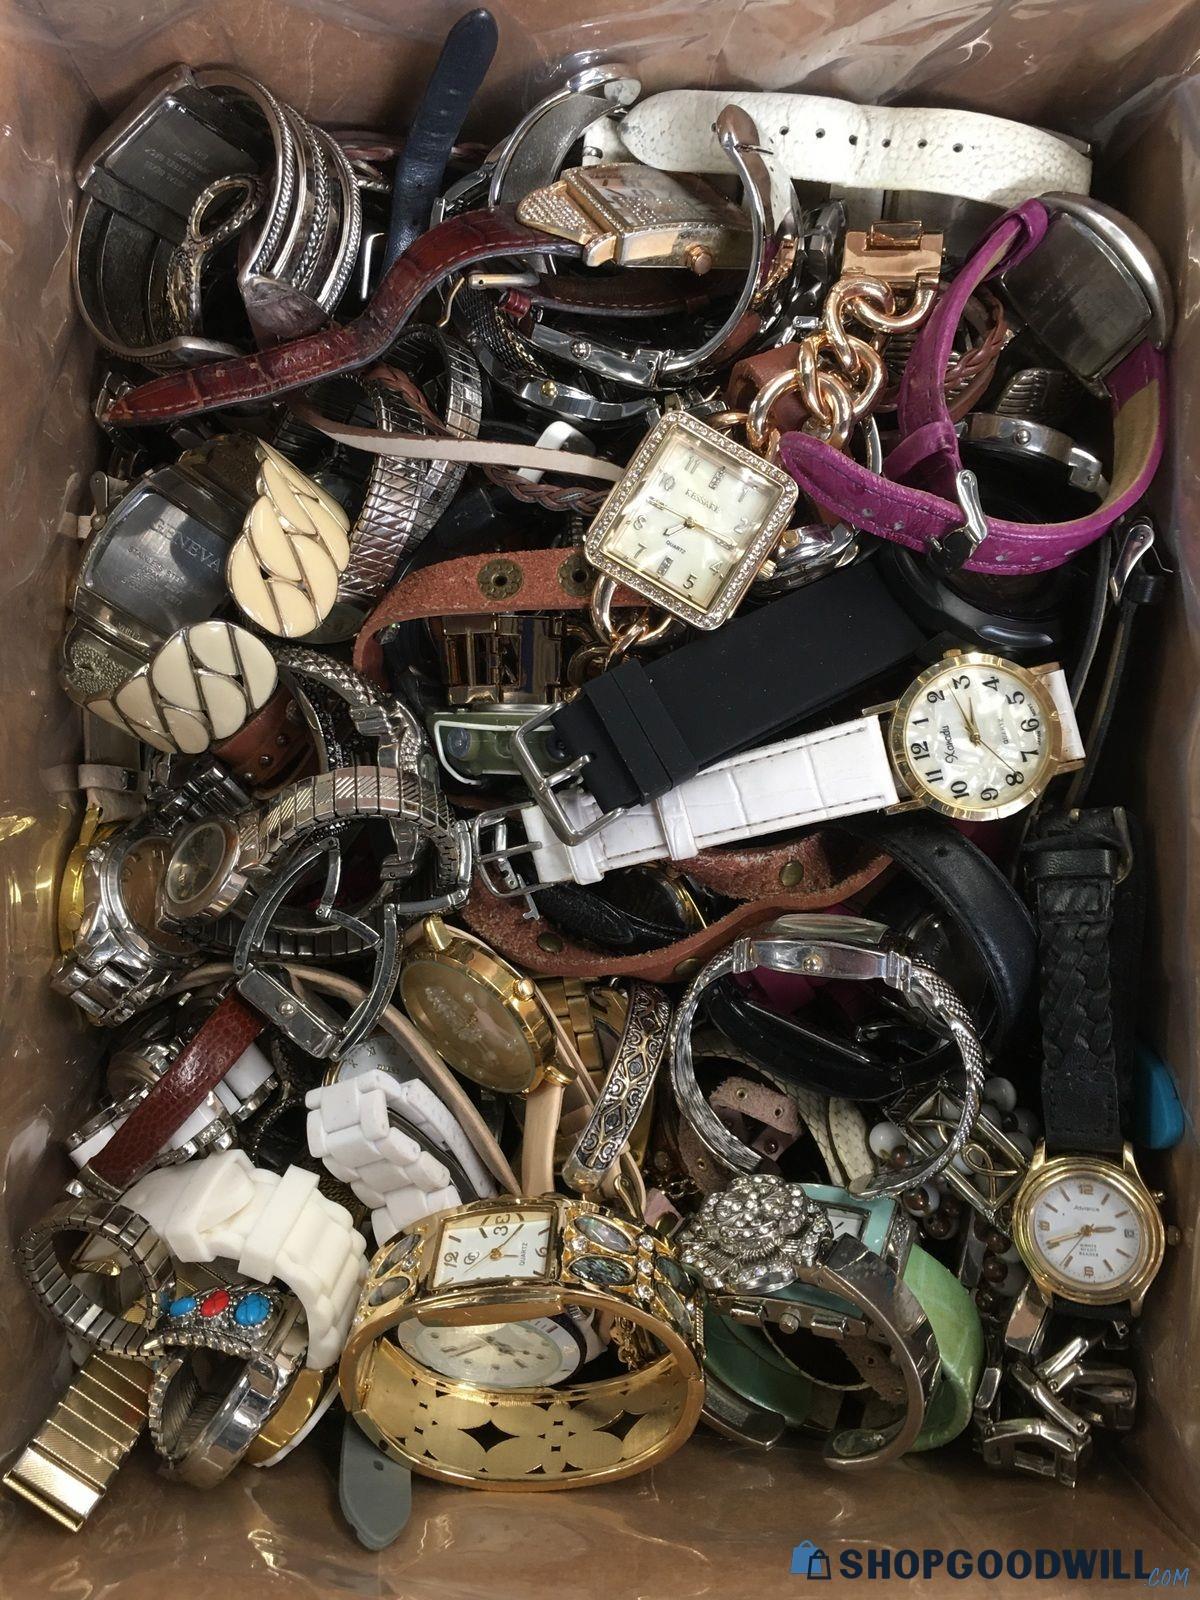 17 Lbs Of New To Vintage Watches Resale Grabbag | ShopGoodwill.com